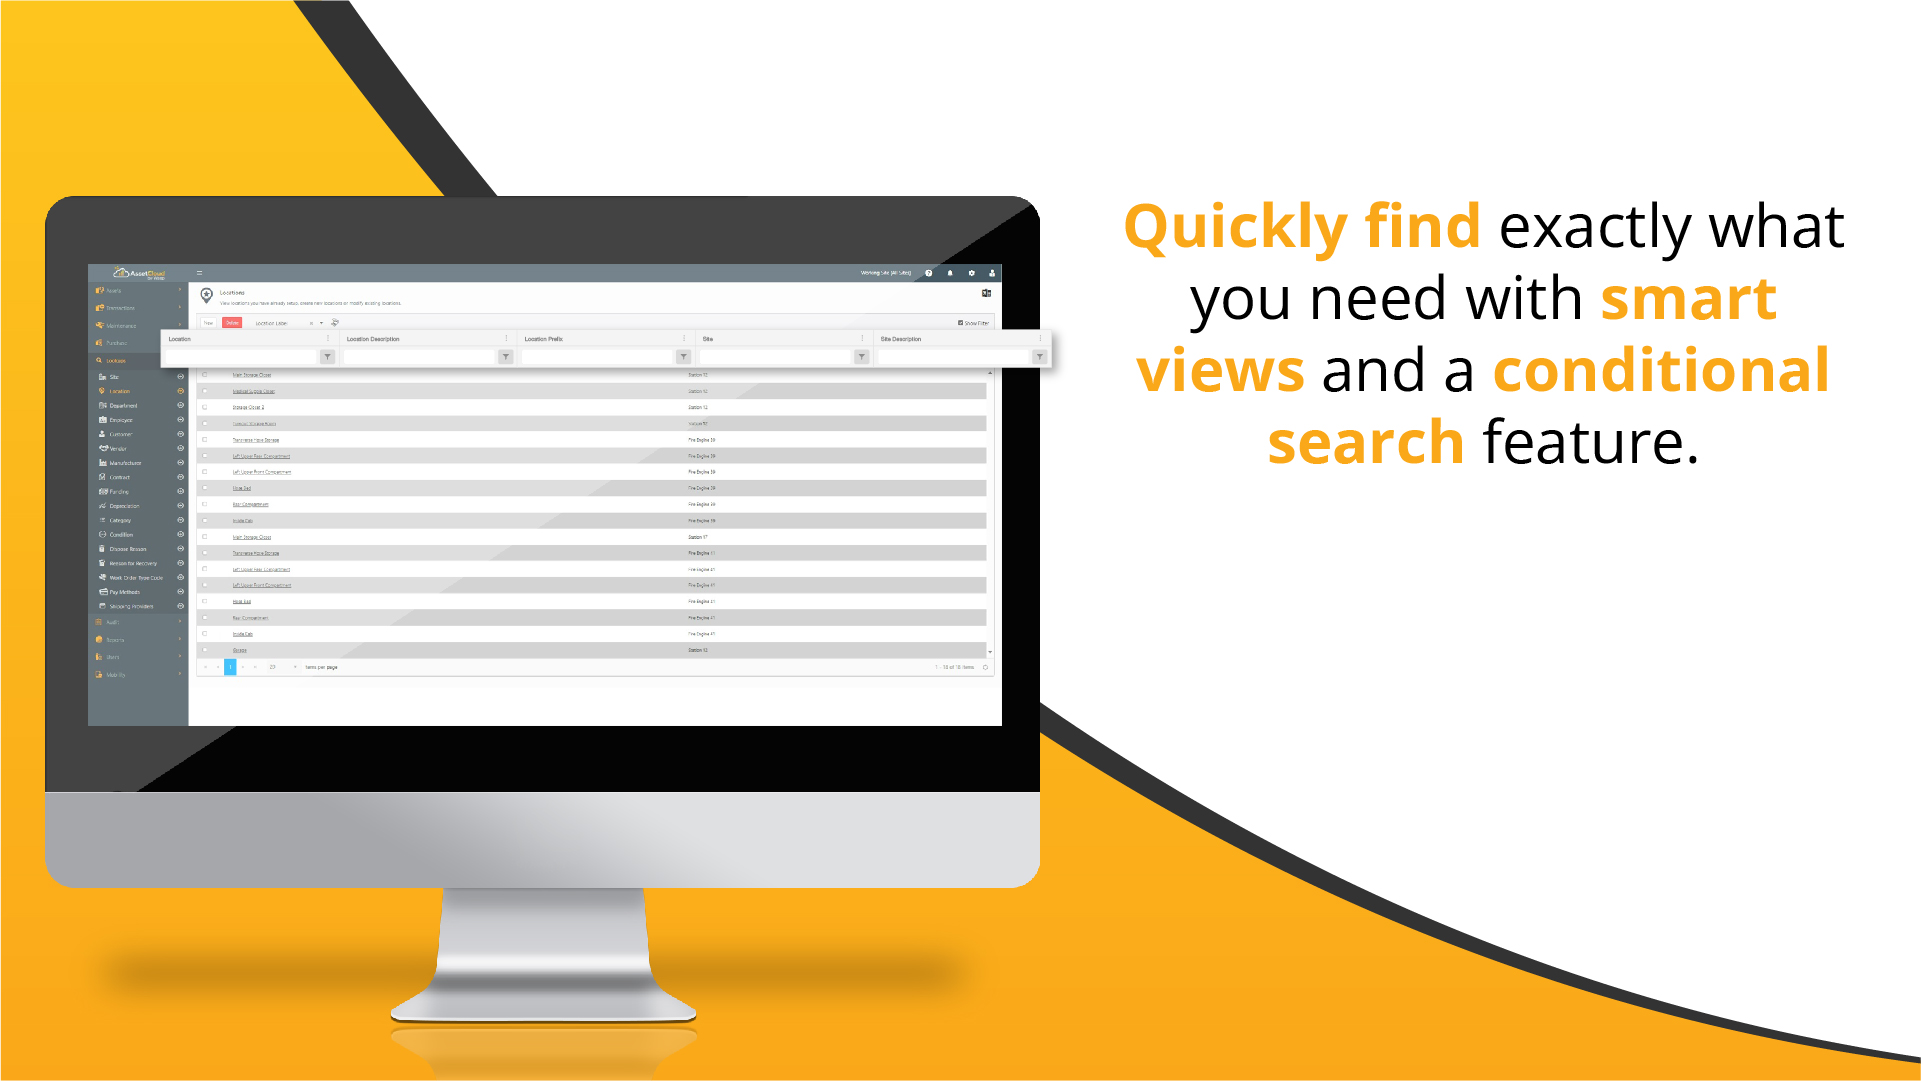 Quickly find exactly what you need with smart views and a conditional search feature